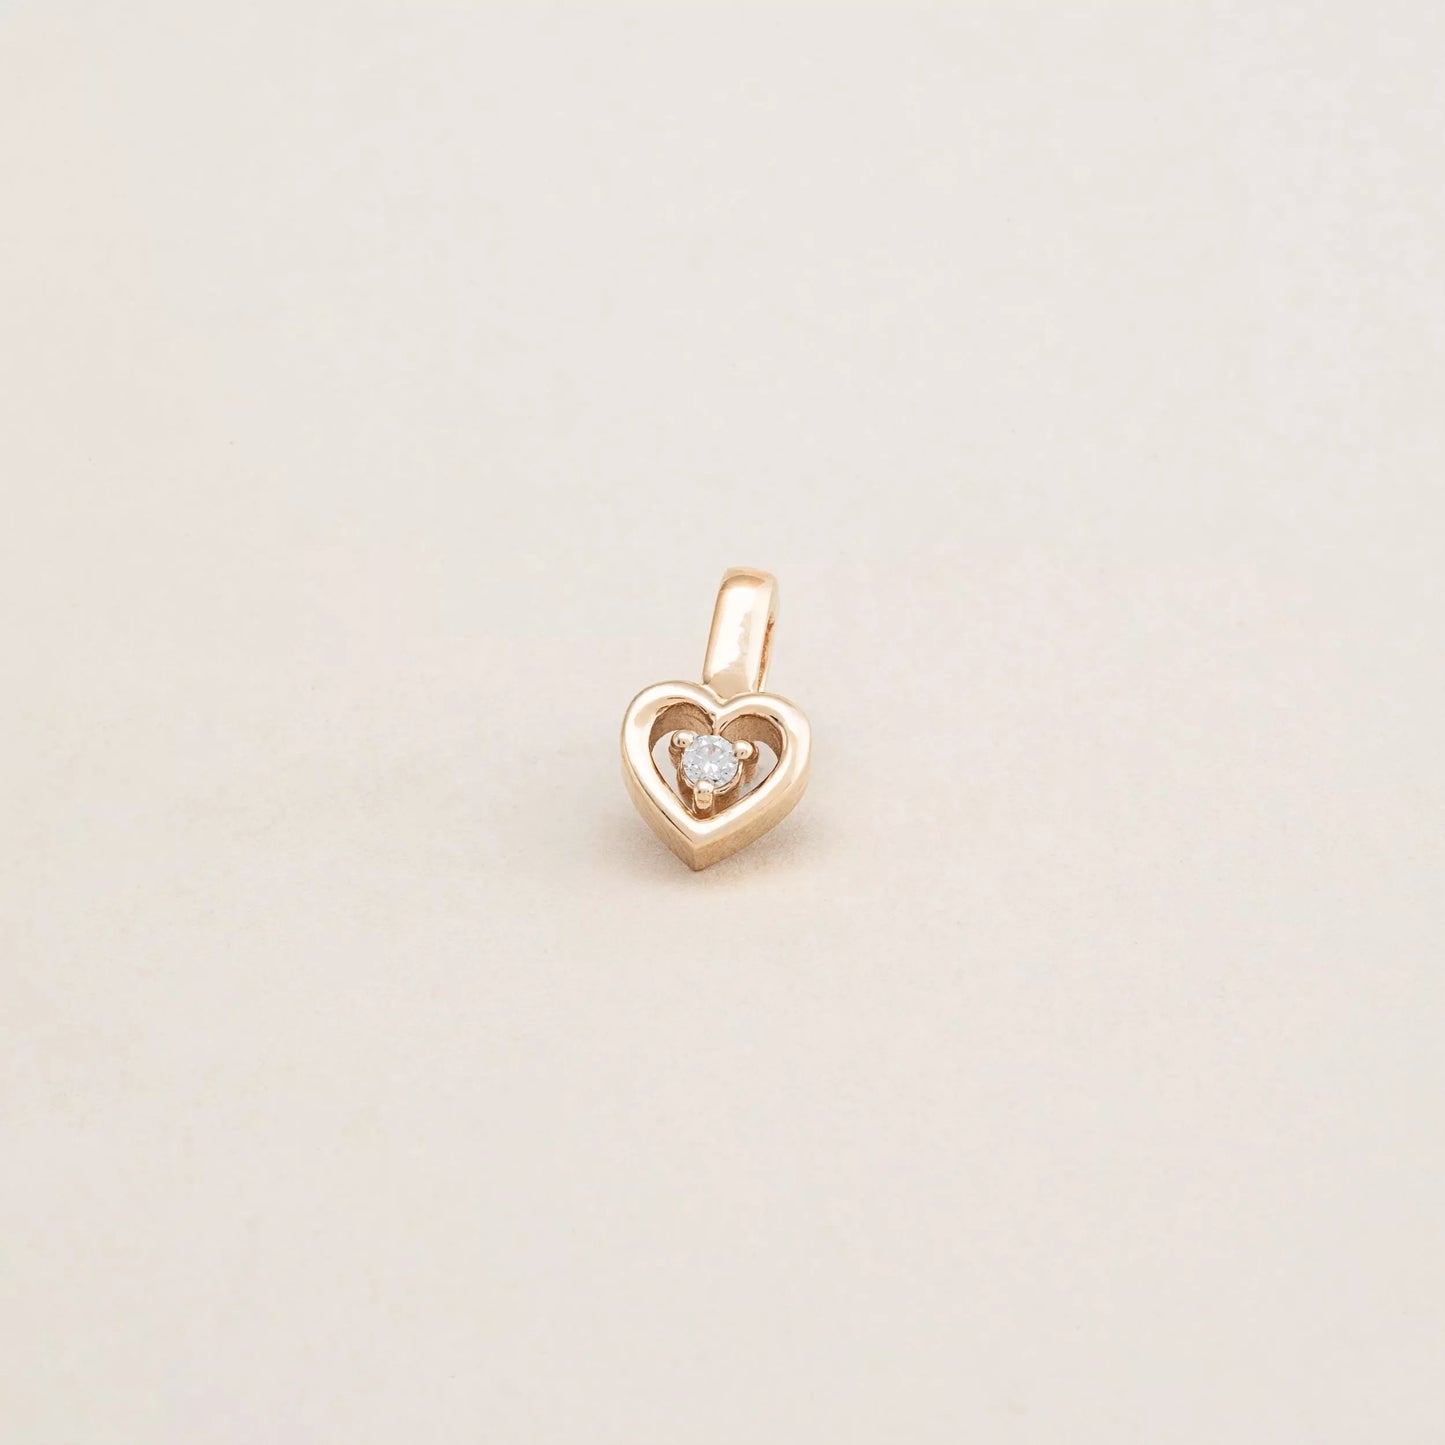 The Heart Charm. 14K solid recycled gold.